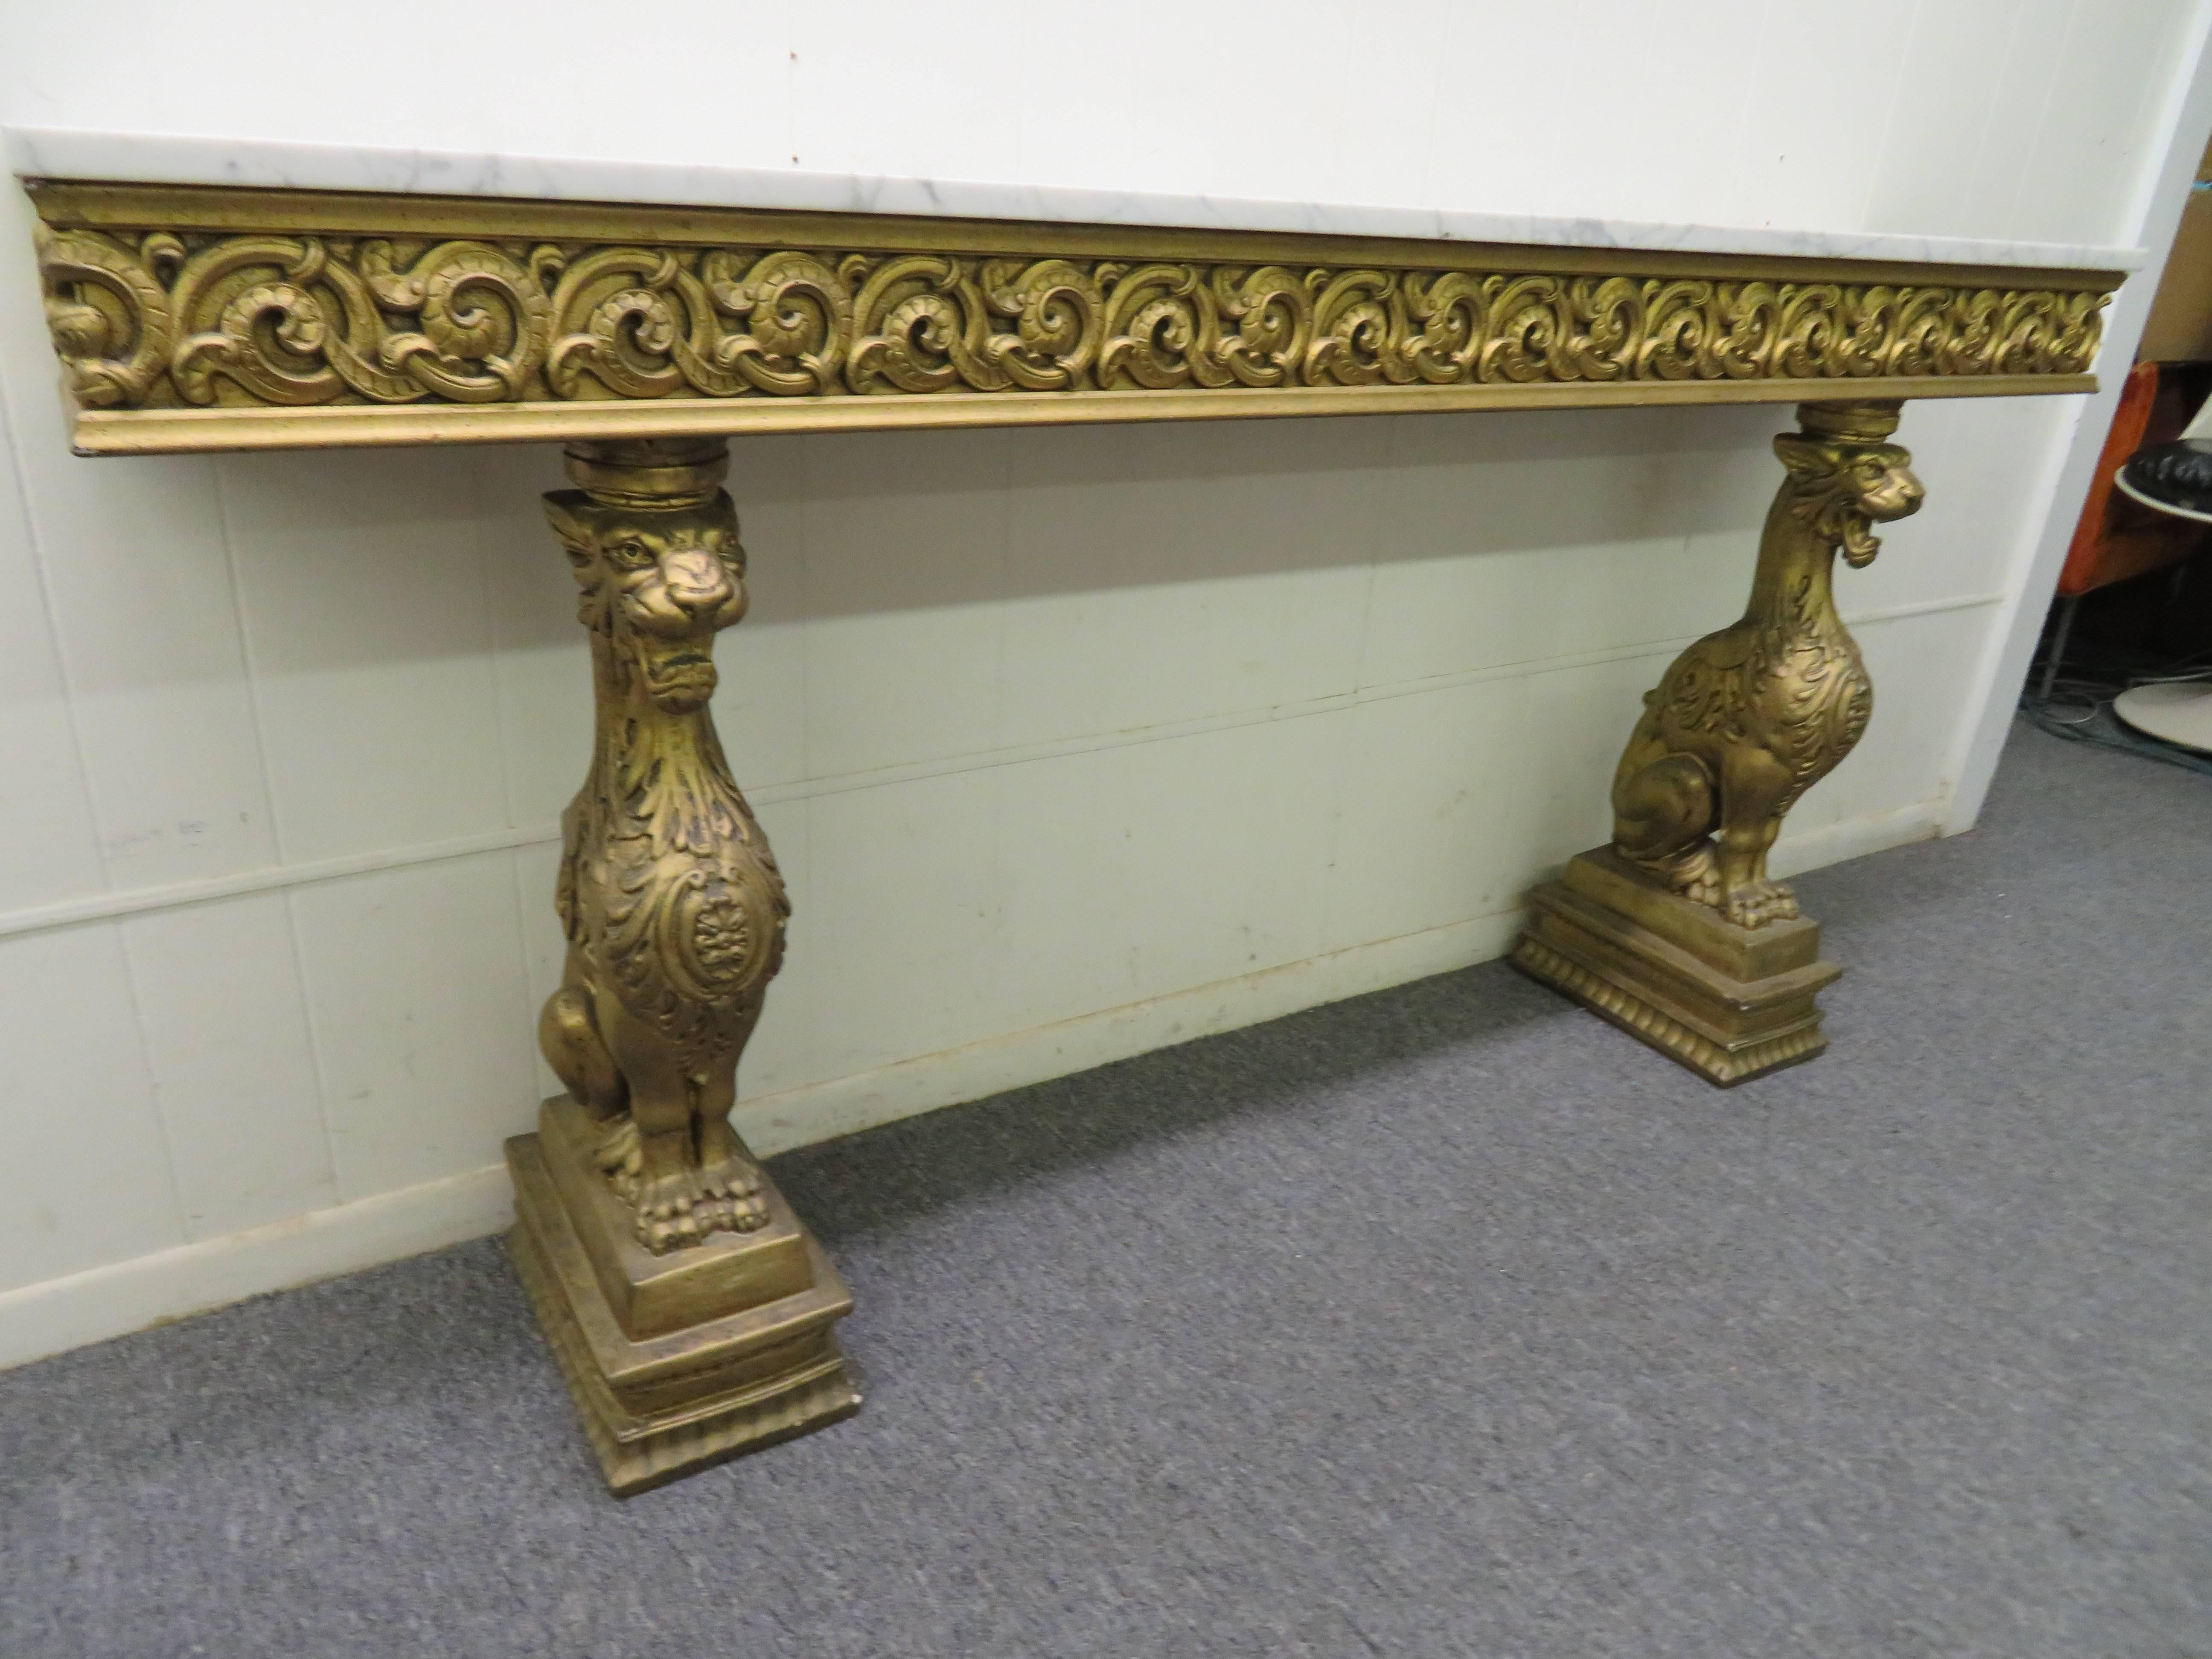 Awesome and whimsical Gothic golden griffin pier mount marble-top console table. Make a huge statement in your foyer or hallway with this fun unusual console table-can even be used as the beginnings of a mantel-super cool!